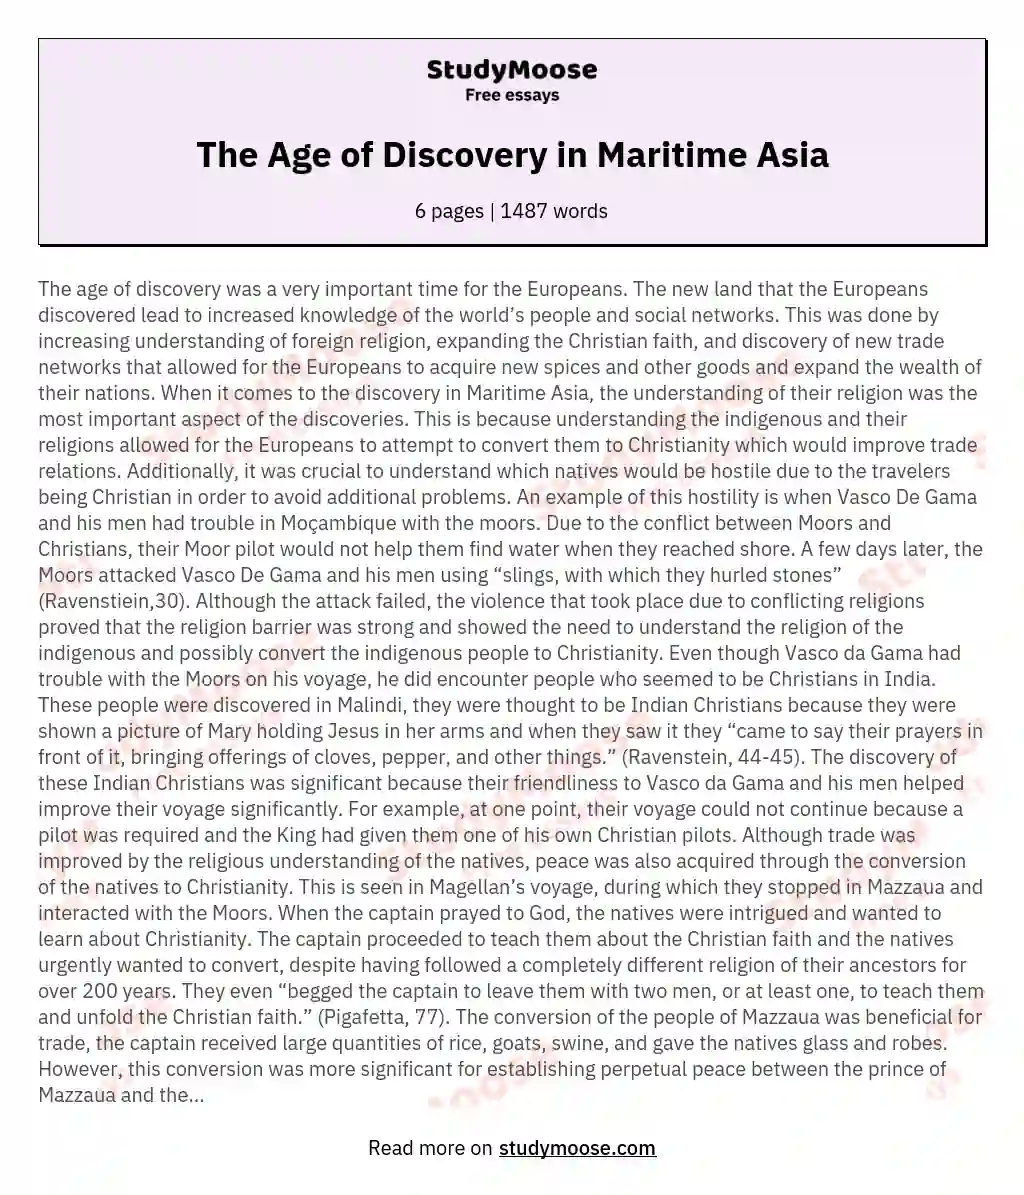 The Age of Discovery in Maritime Asia essay